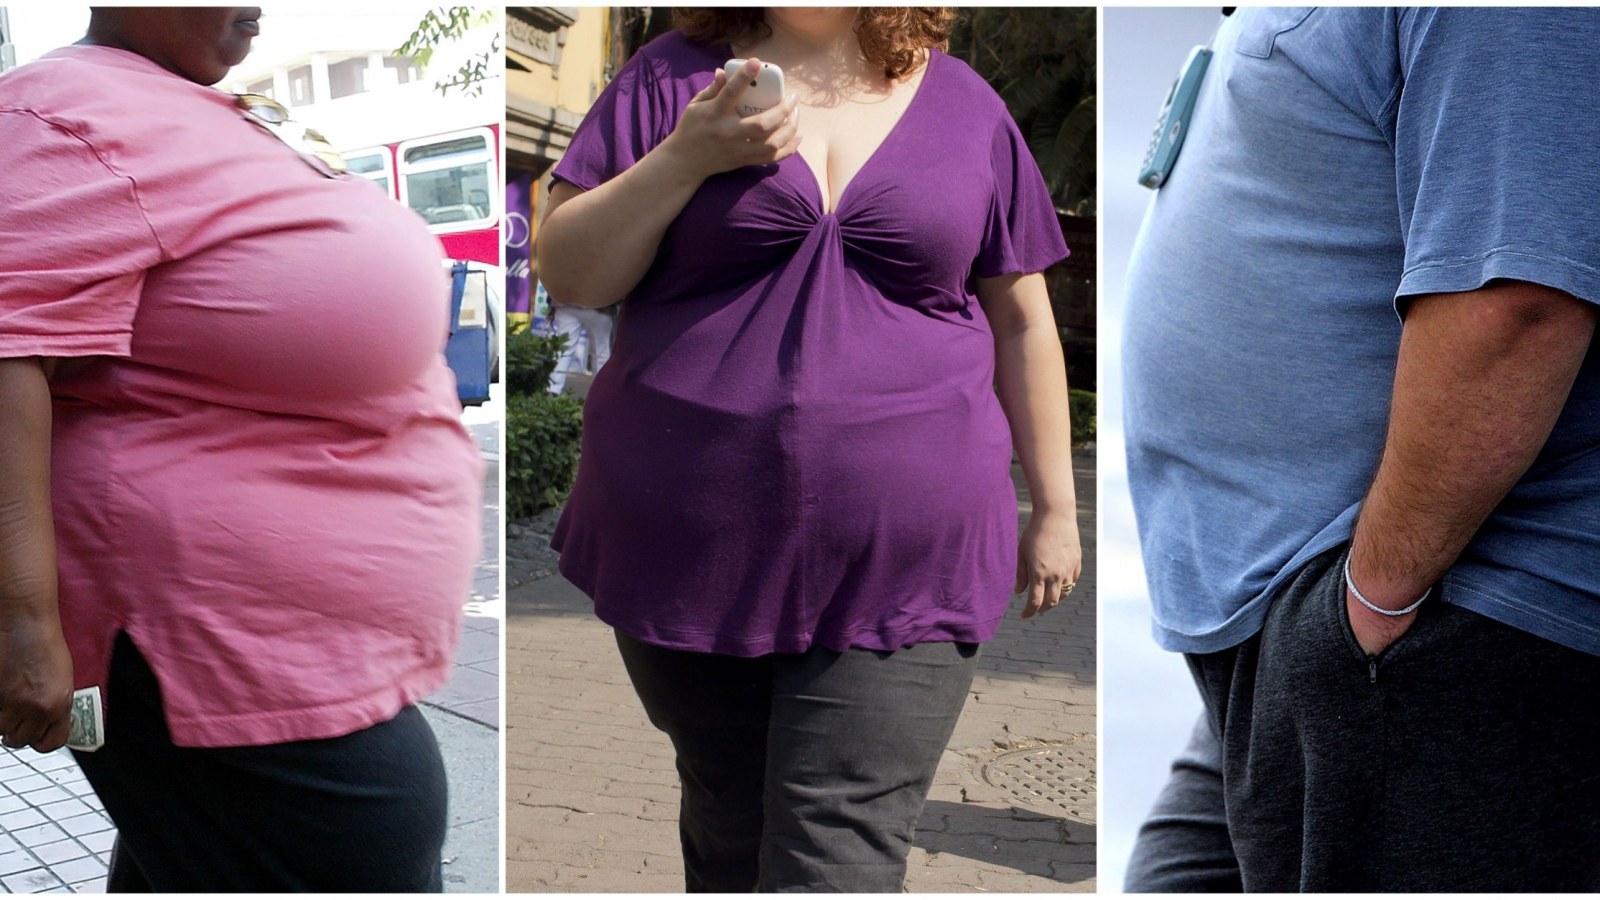 Body-Positive Movement People to Think Aren't Obese, Study Says